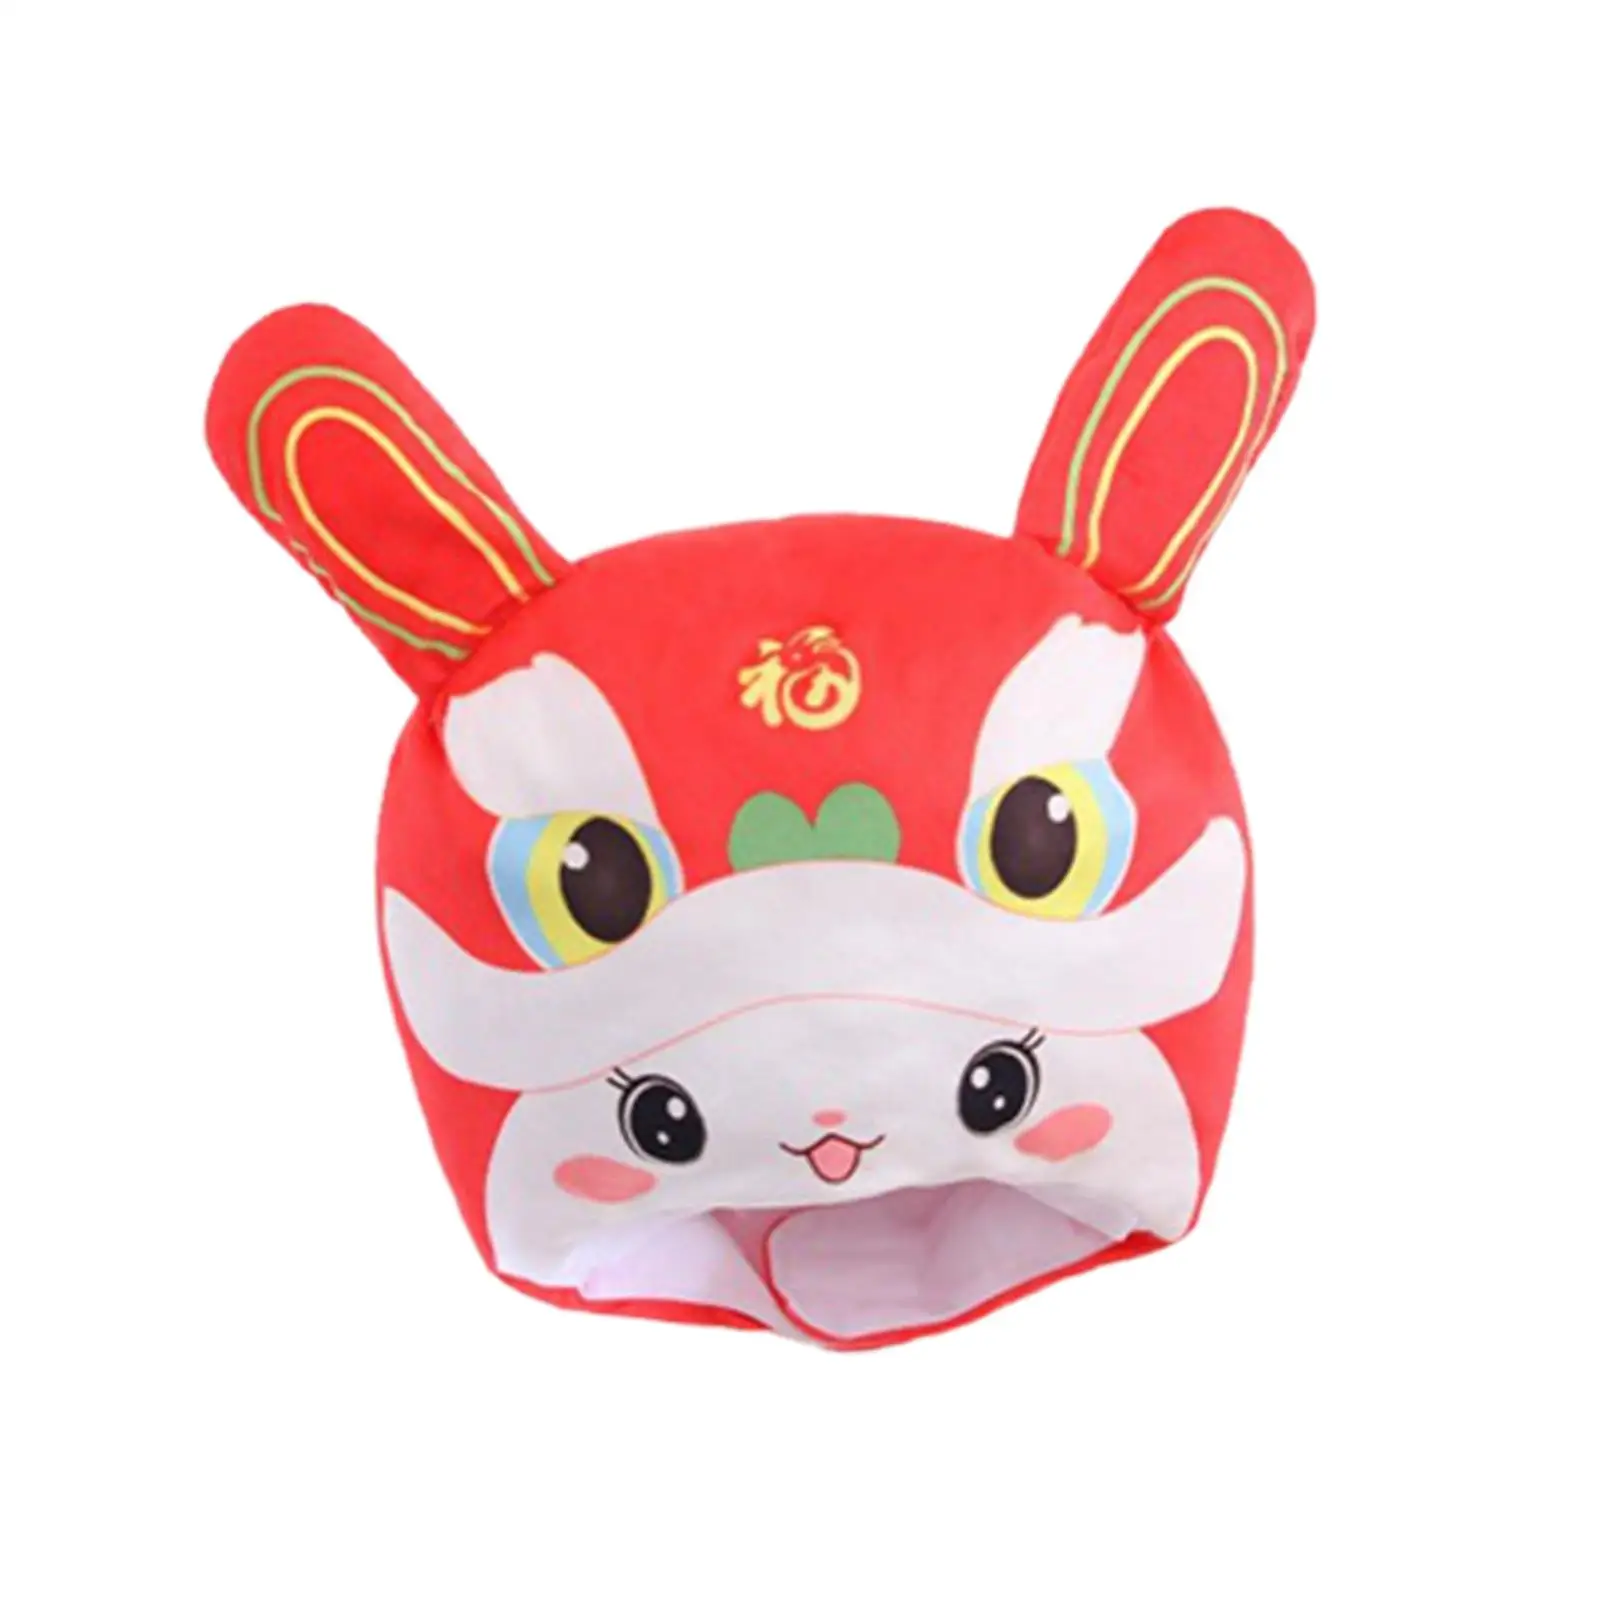 Funny Lion Rabbit Plush Hat Headgear Winter Photo Prop Adult Kids Gift Novelty for Costume Party Fancy Dress New Year Festival